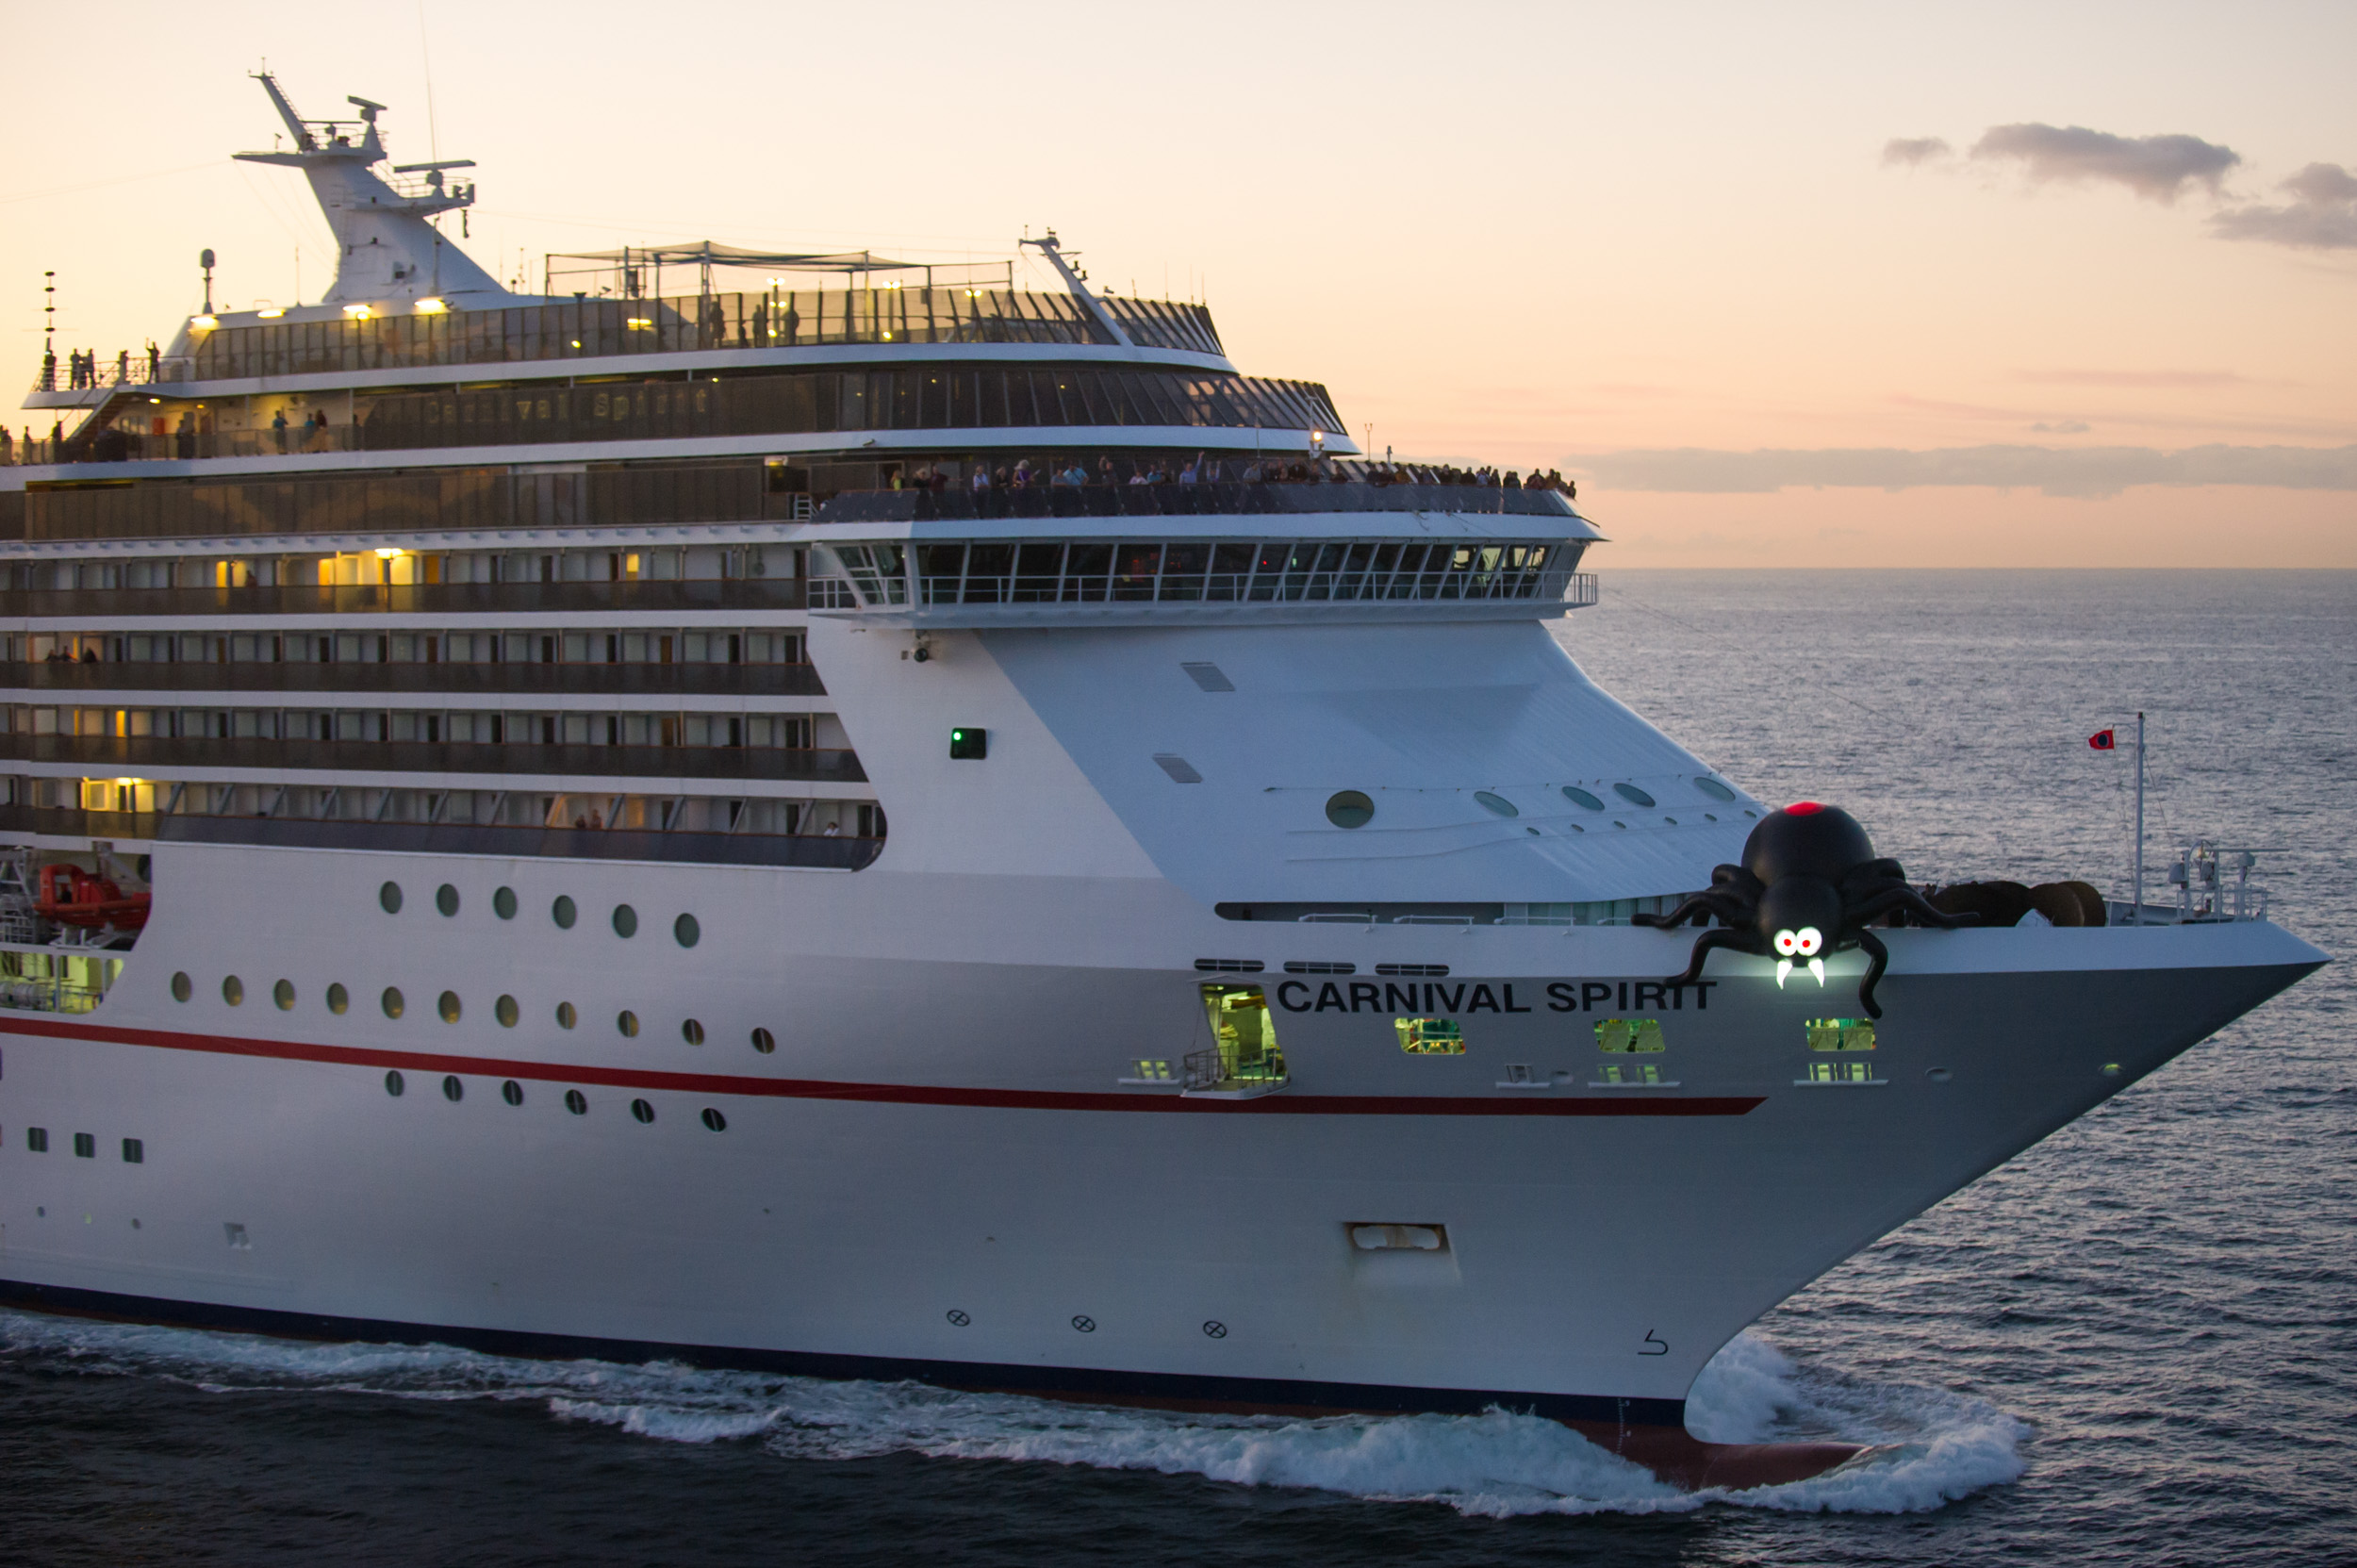 Carnival Spirit creeps into Sydney with a giant Redback 2